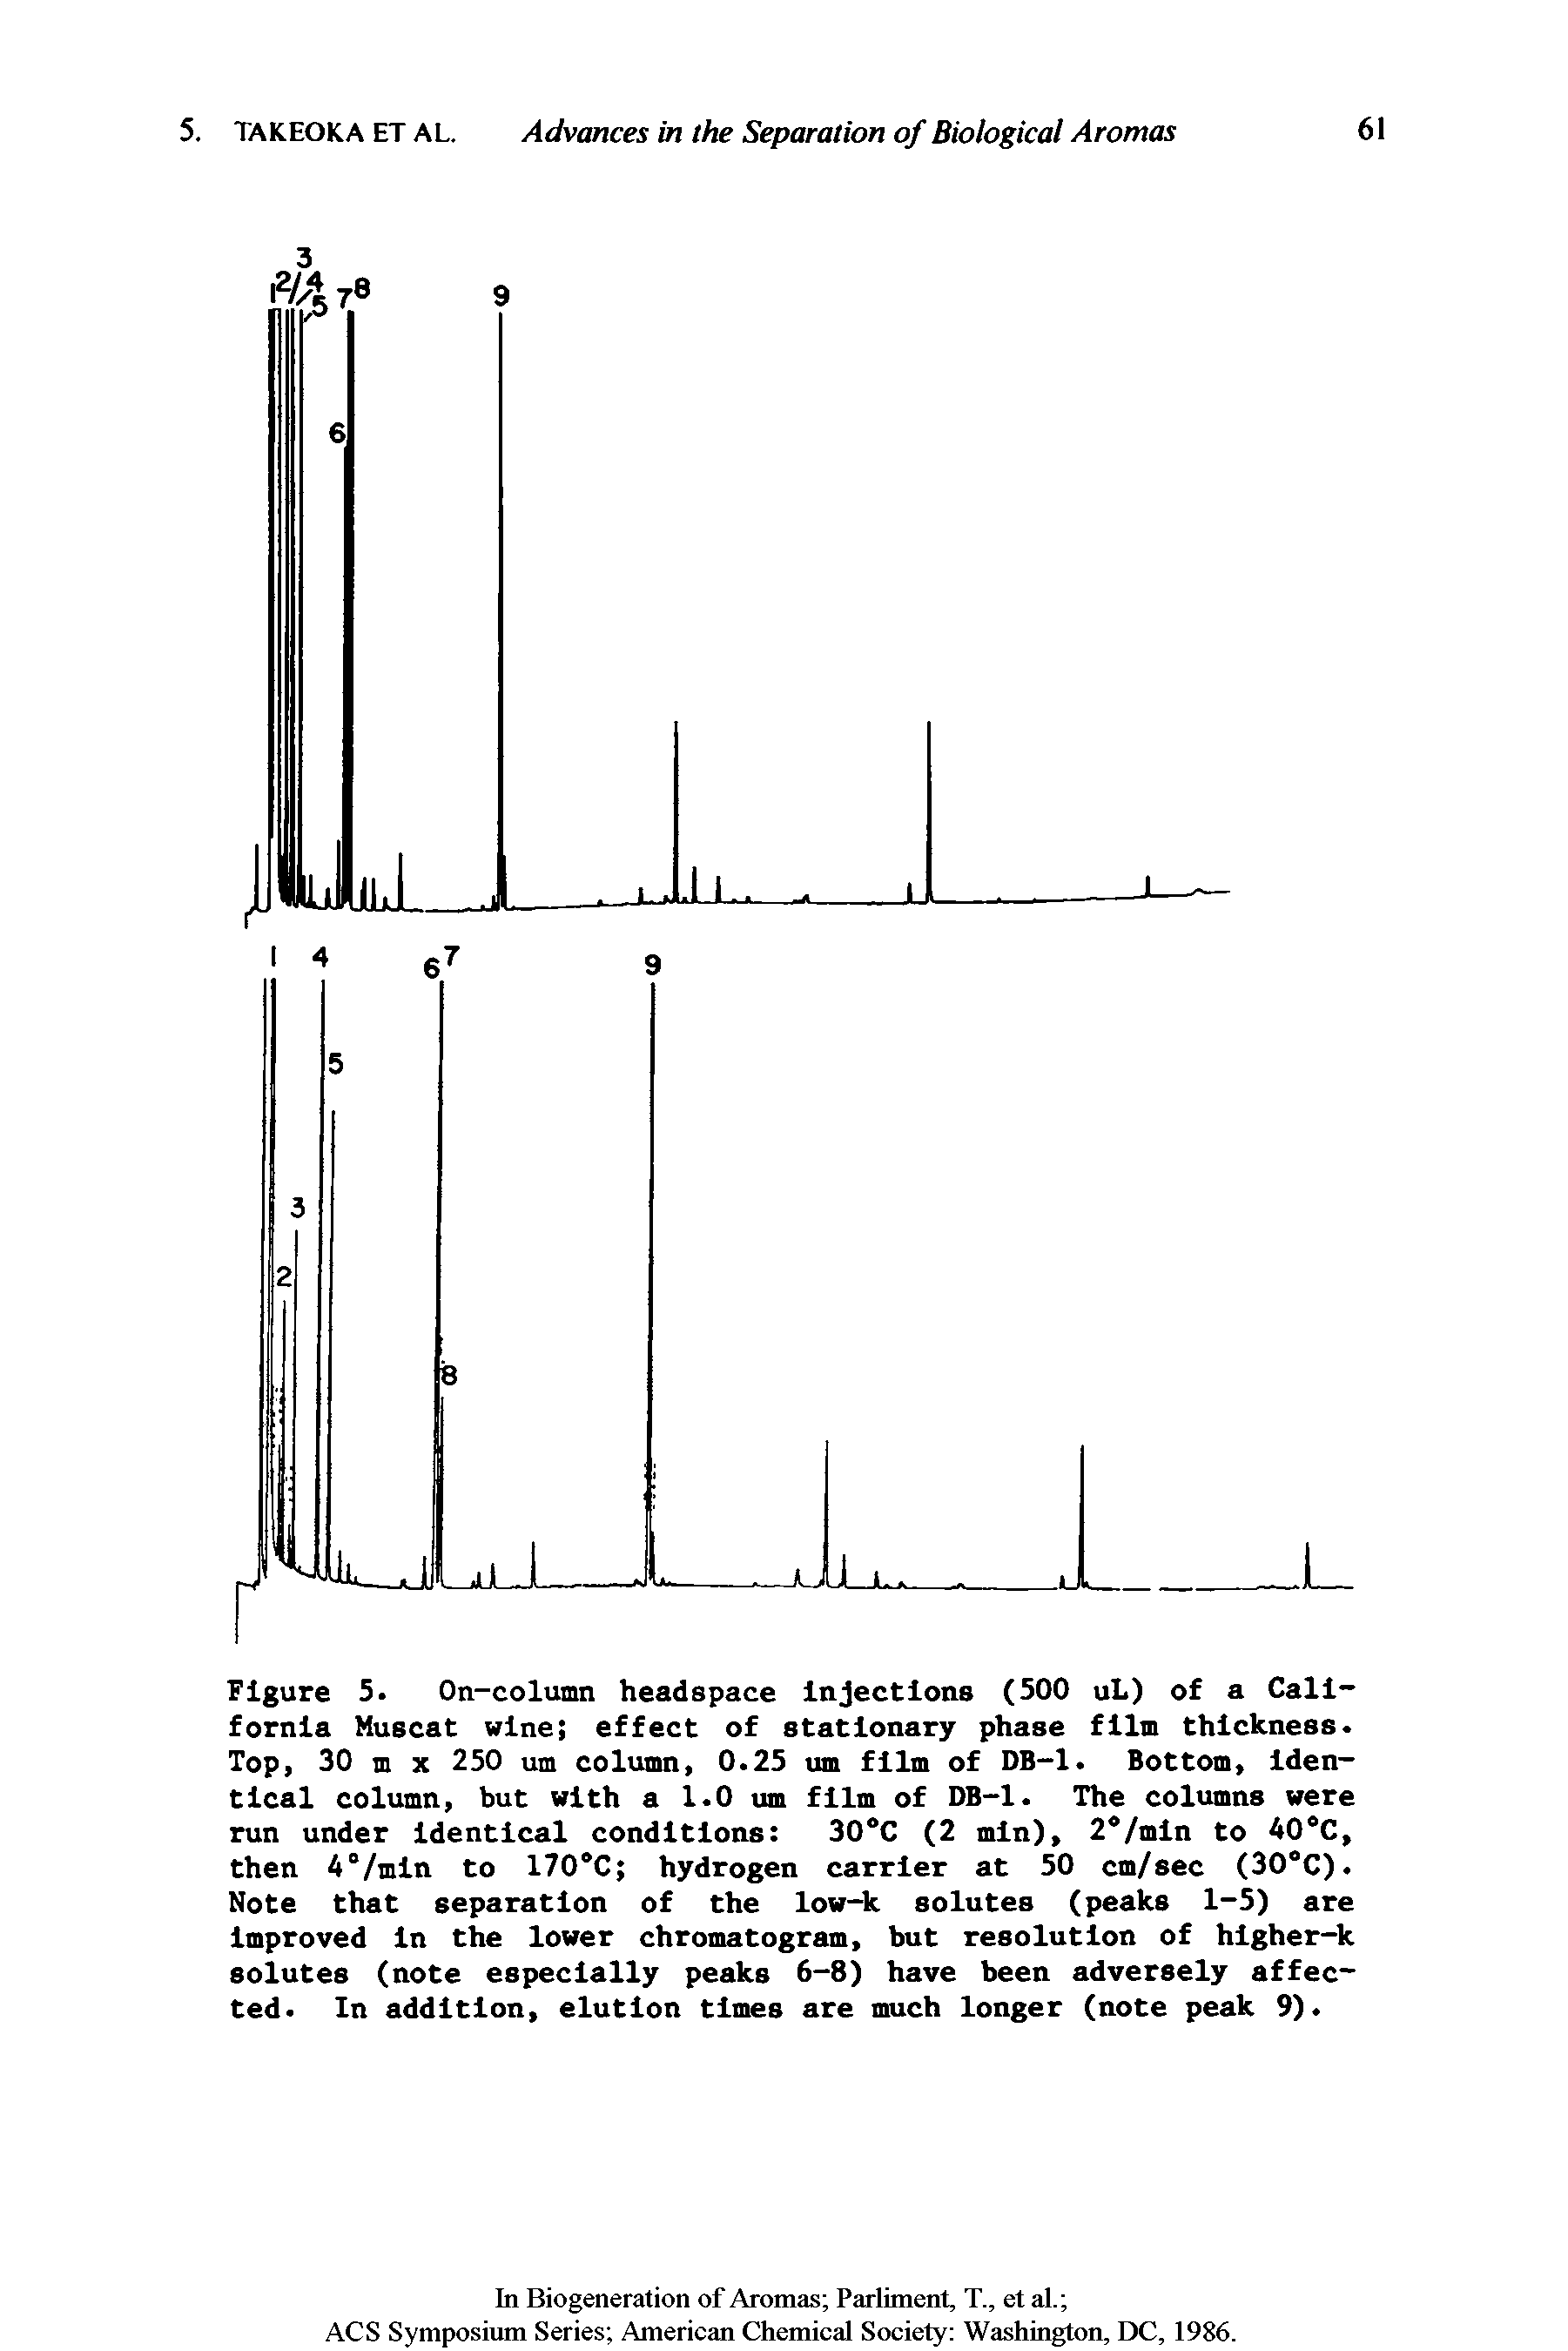 Figure 5. On-column headspace injections (500 uL) of a California Muscat wine effect of stationary phase film thickness. Top, 30 m x 250 urn column, 0.25 um film of DB-1. Bottom, identical column, but with a 1.0 um film of DB-1. The columns were run under Identical conditions 30°C (2 min), 2°/min to 40°C,...